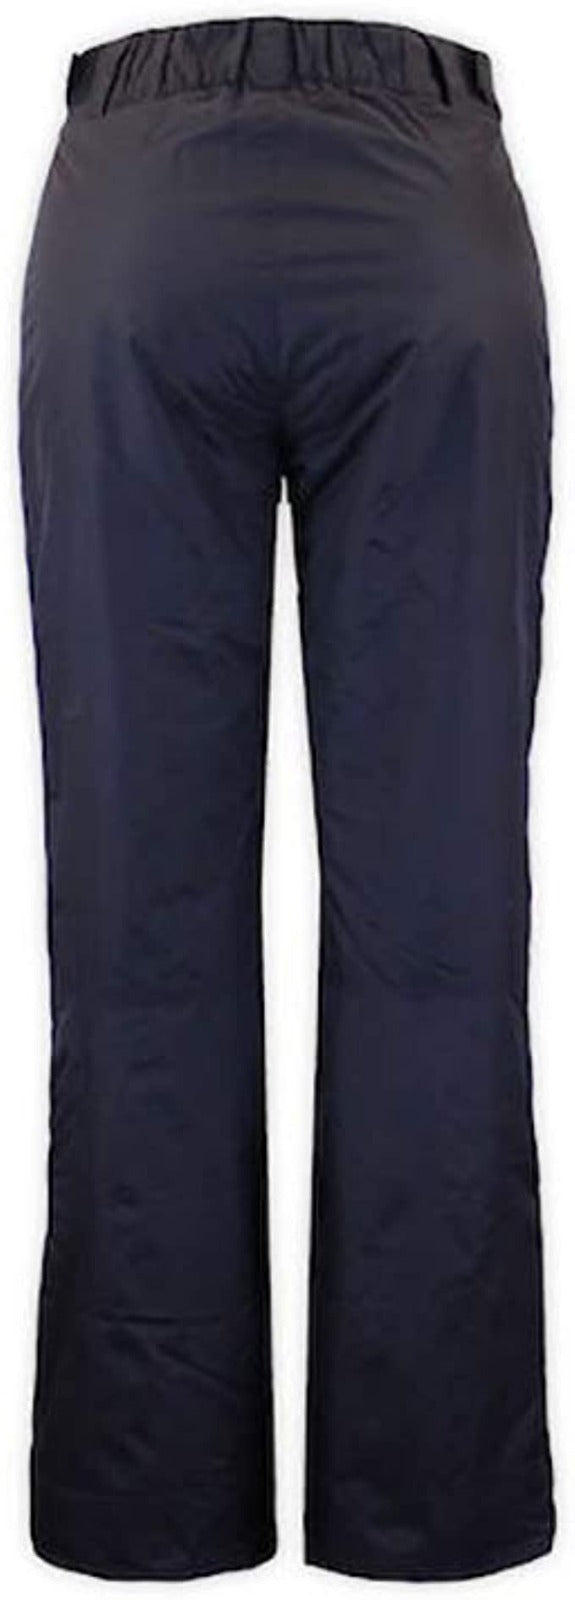 Rawik Insulated Water-Resistant Storm Pant (Women's) Rear